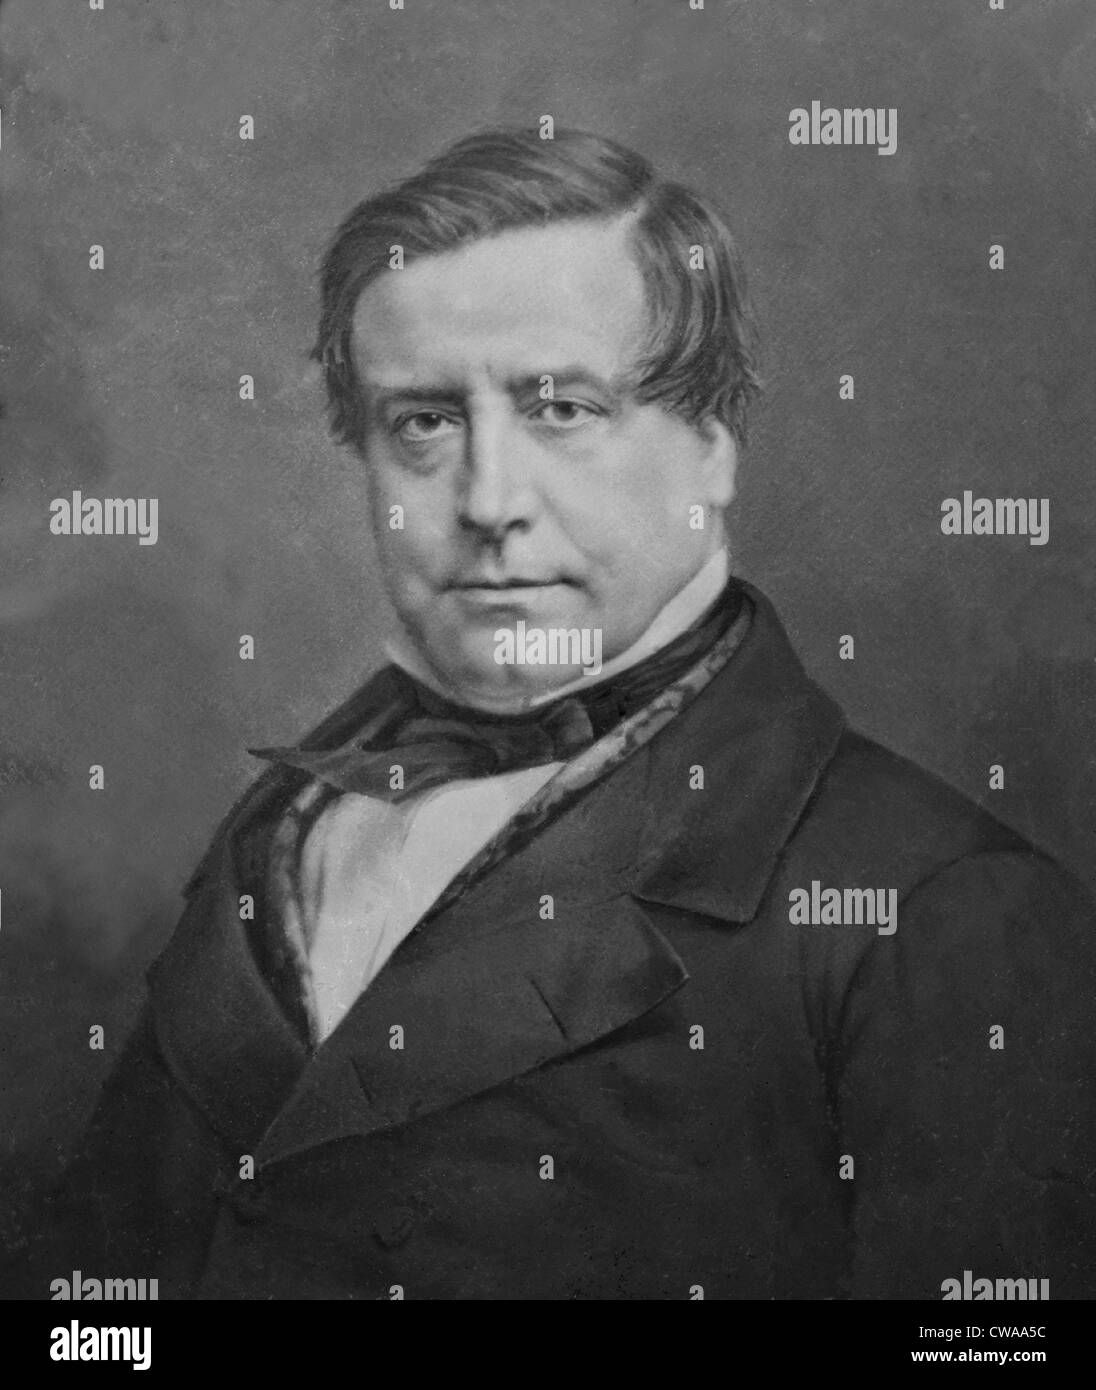 Washington Irving (1783-1859), American author of classic short stories 'The Legend of Sleepy Hollow' and 'Rip Van Winkle,' Stock Photo